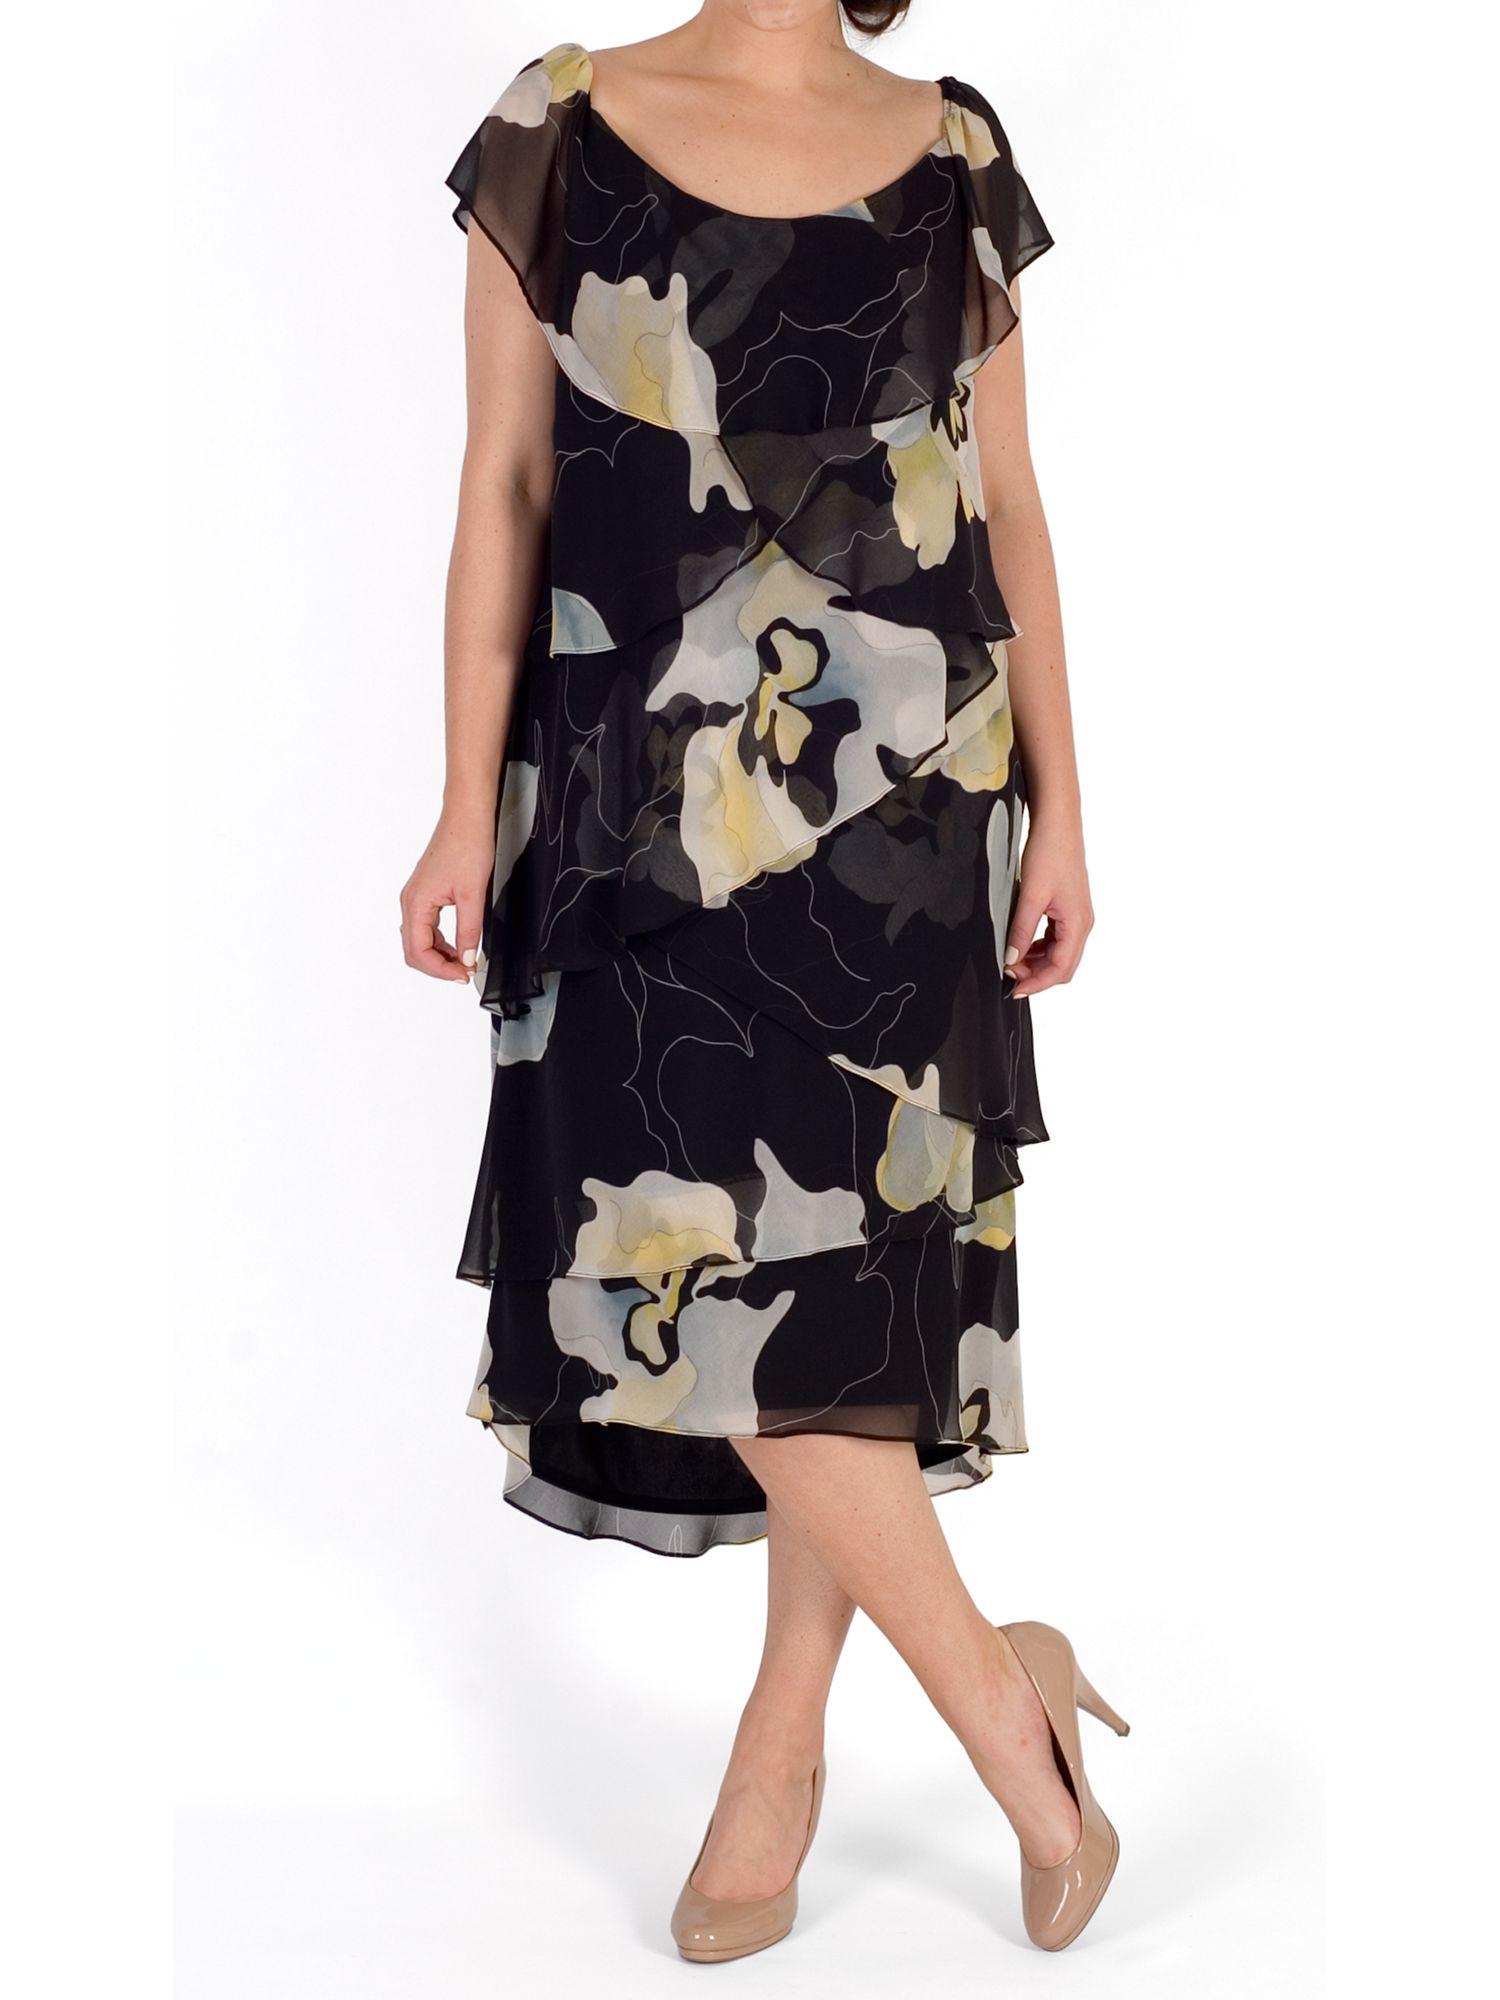 Chesca Floral Layered Dress, Black/Multi at John Lewis & Partners